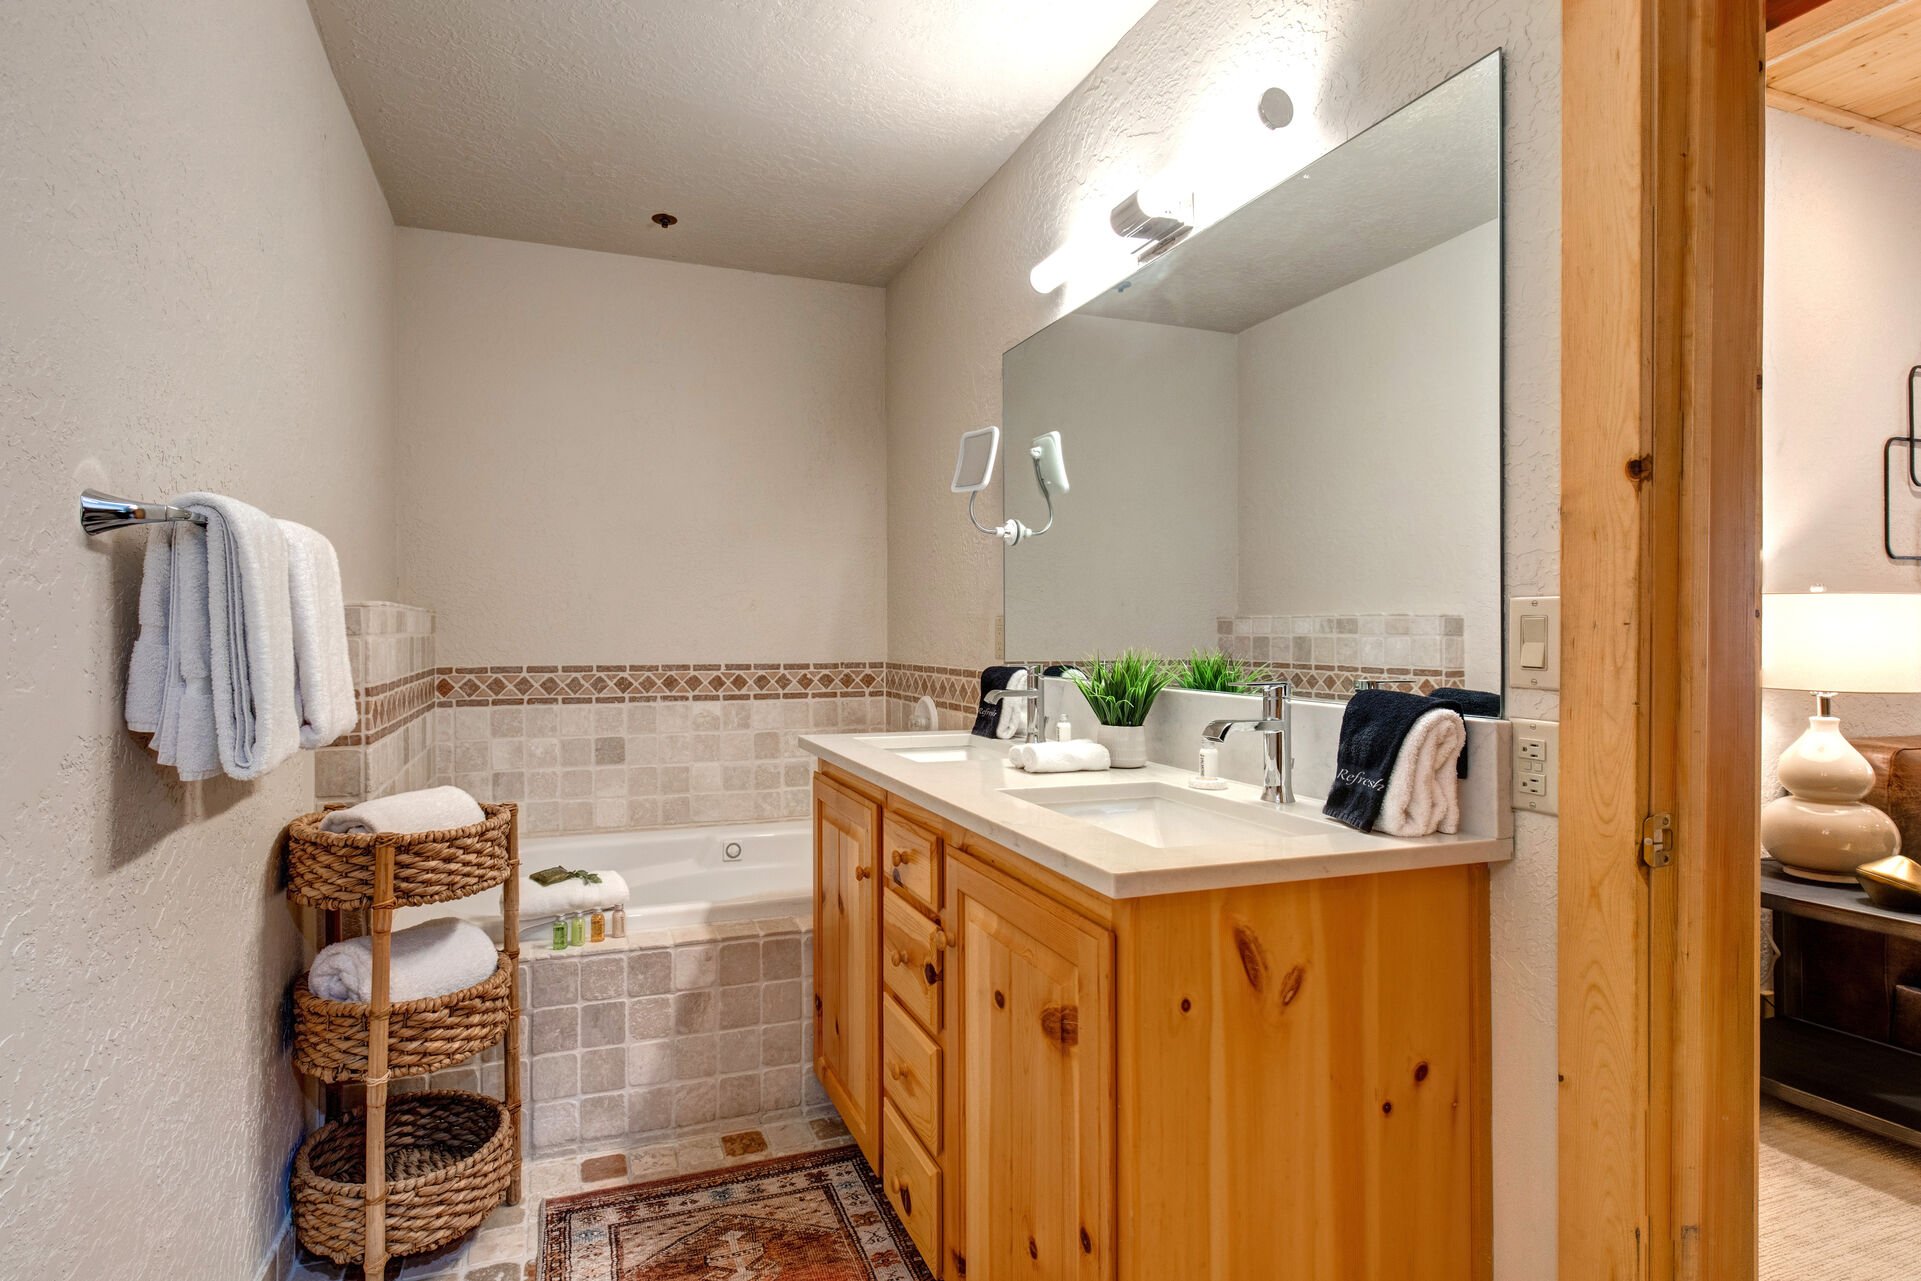 Master Bathroom with dual vanities, jetted soaking tub, and large tiled shower